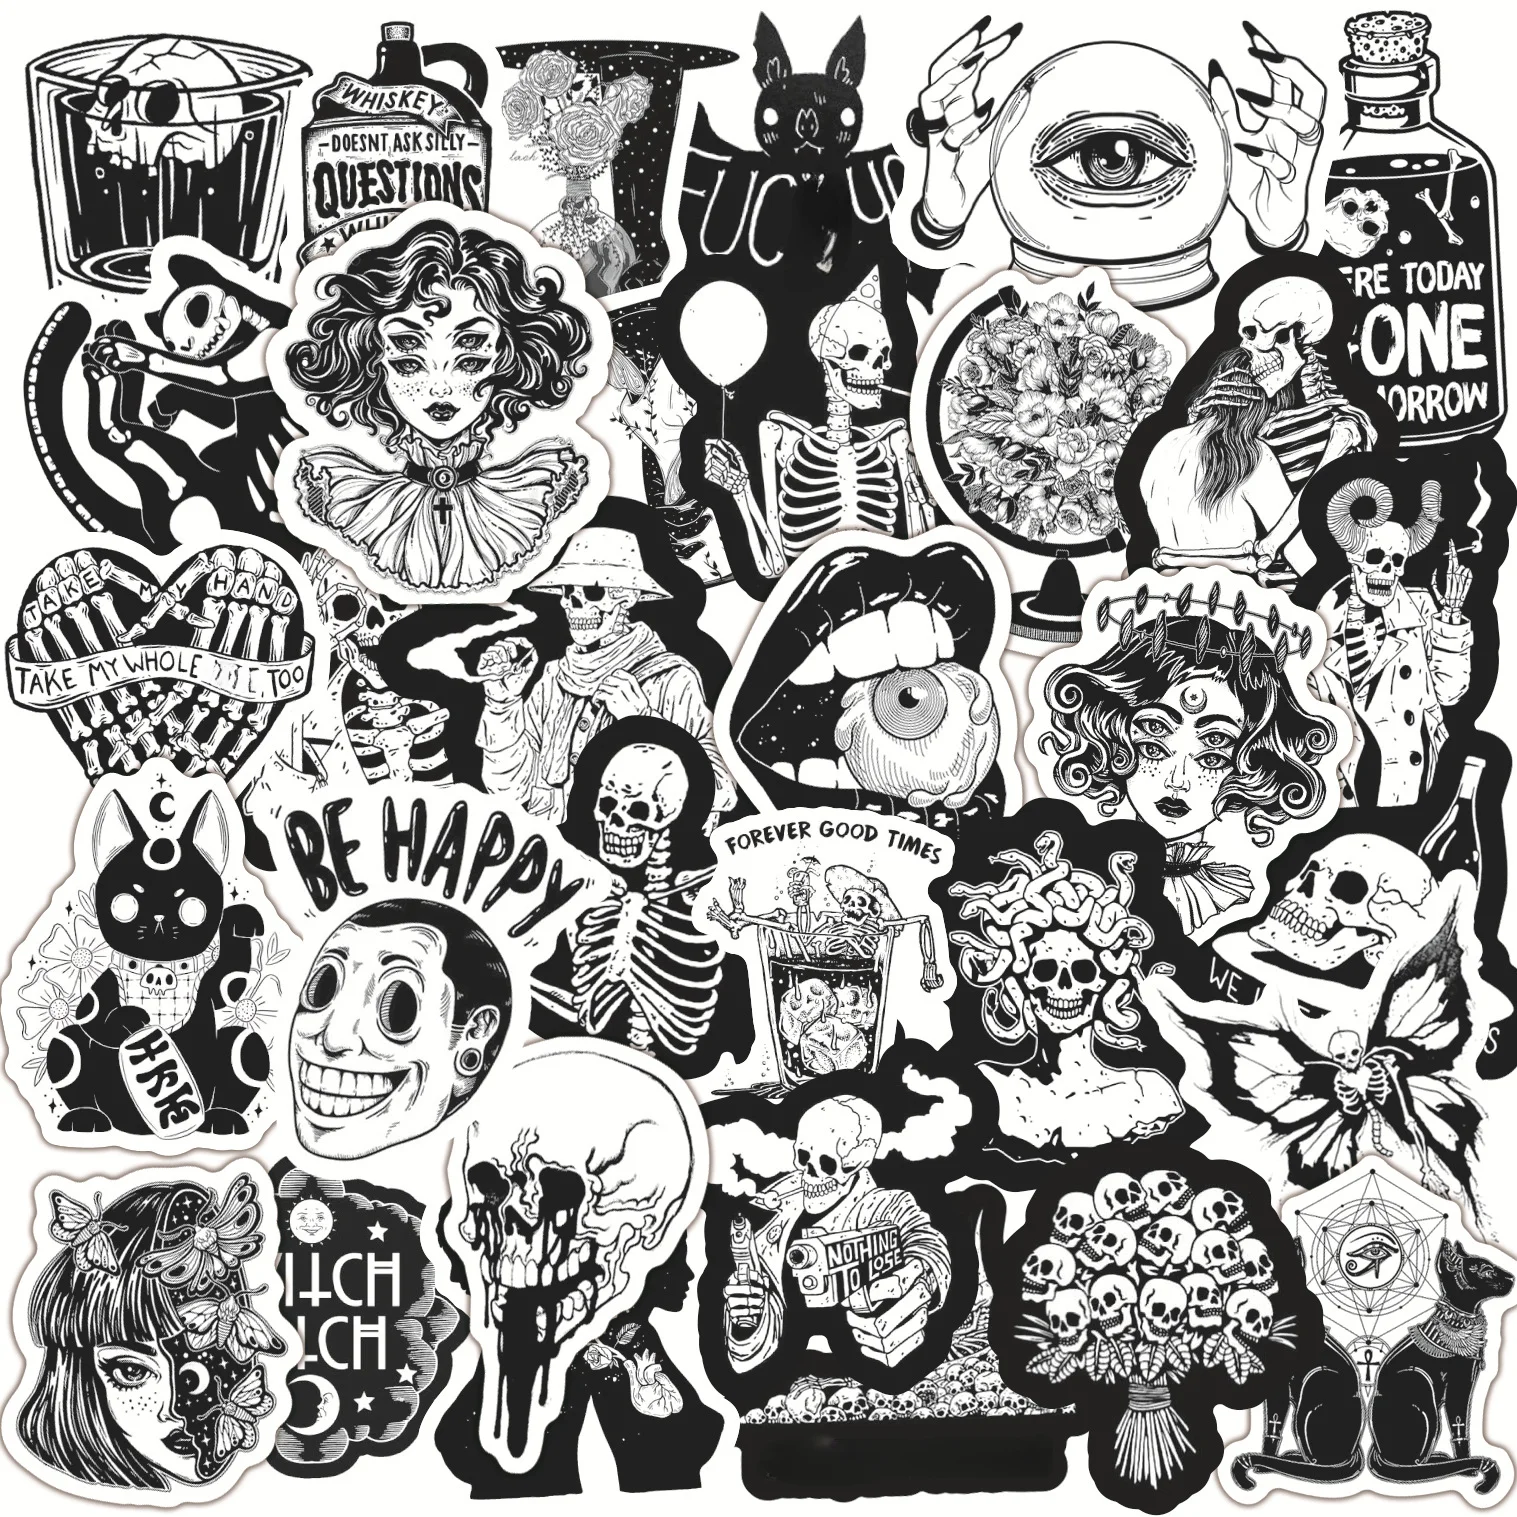 100PCS Mixed Black White Gothic Stickers Graffiti Motorcycle Skateboard Travel Phone Case Decal Toys Sticker Waterproof a6 retro blank paper notebook diary blank sketchbook for graffiti painting drawing black cover 88 pages office school stationery